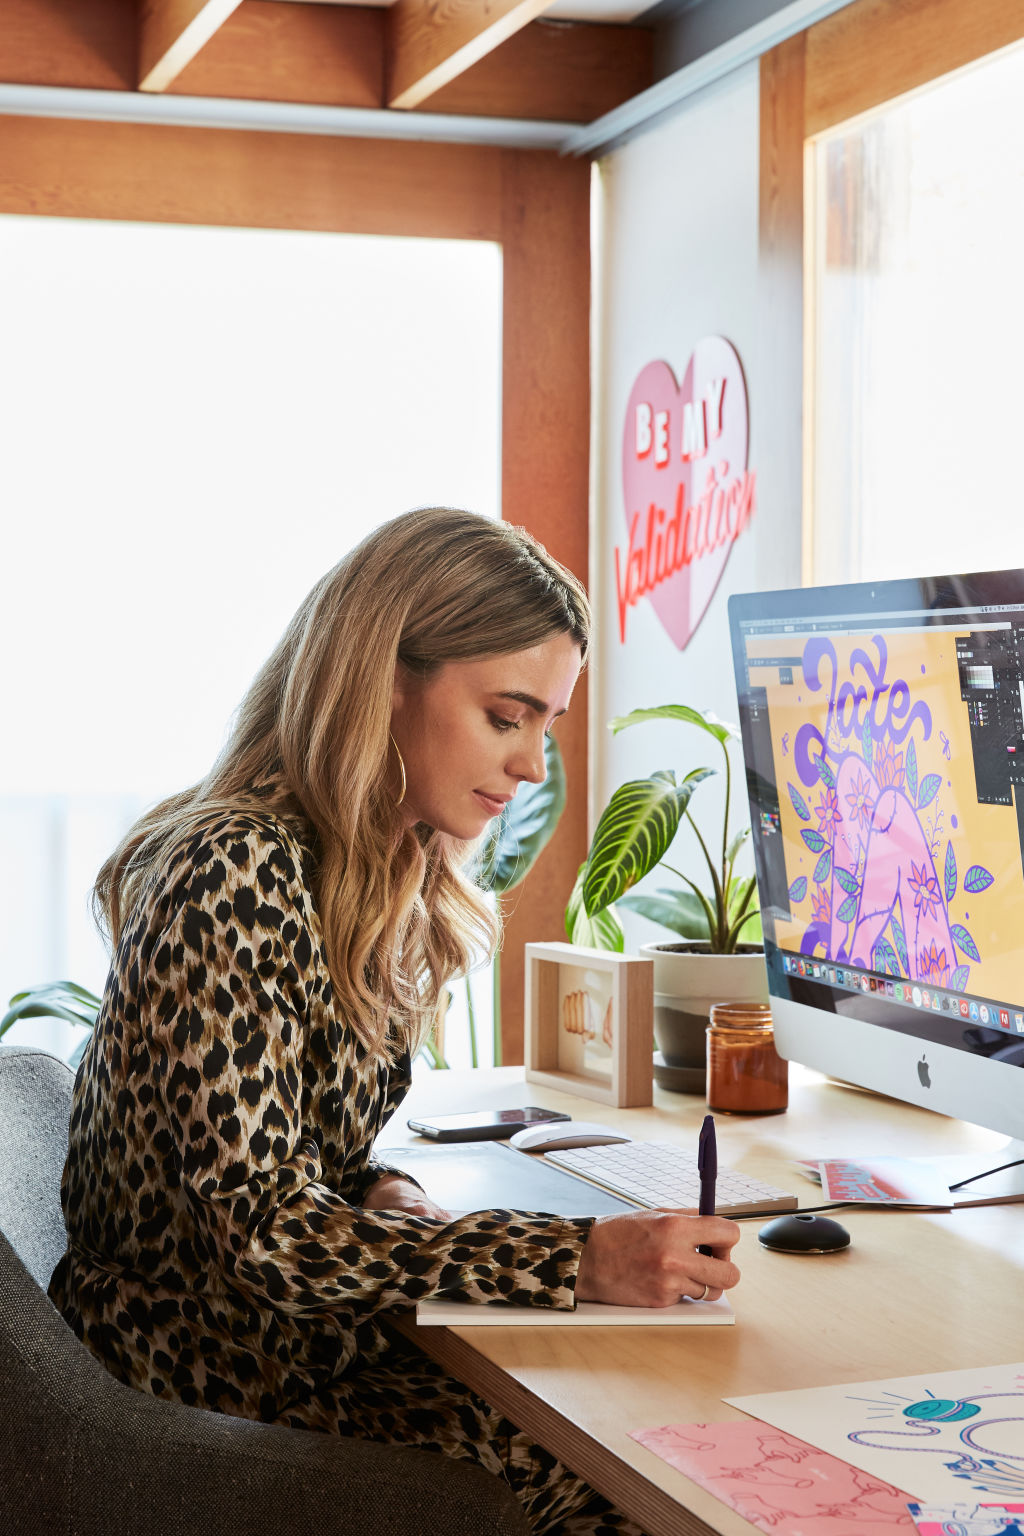 For illustrator Ellen Porteus, working from home can help create clearer boundaries. Photo: Annette O'Brien